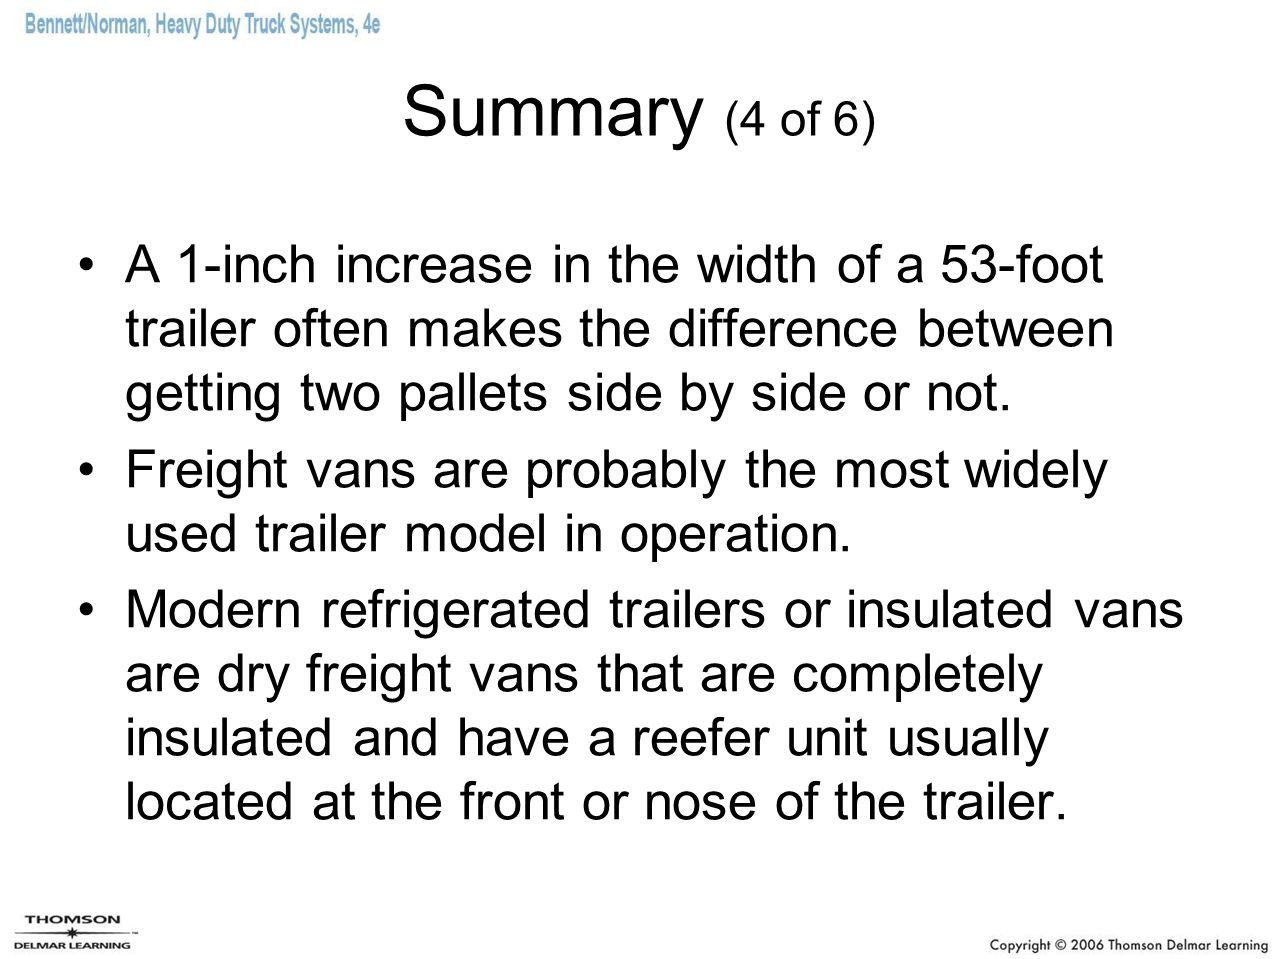 Summary (4 of 6) A 1-inch increase in the width of a 53-foot trailer often makes the difference between getting two pallets side by side or not.